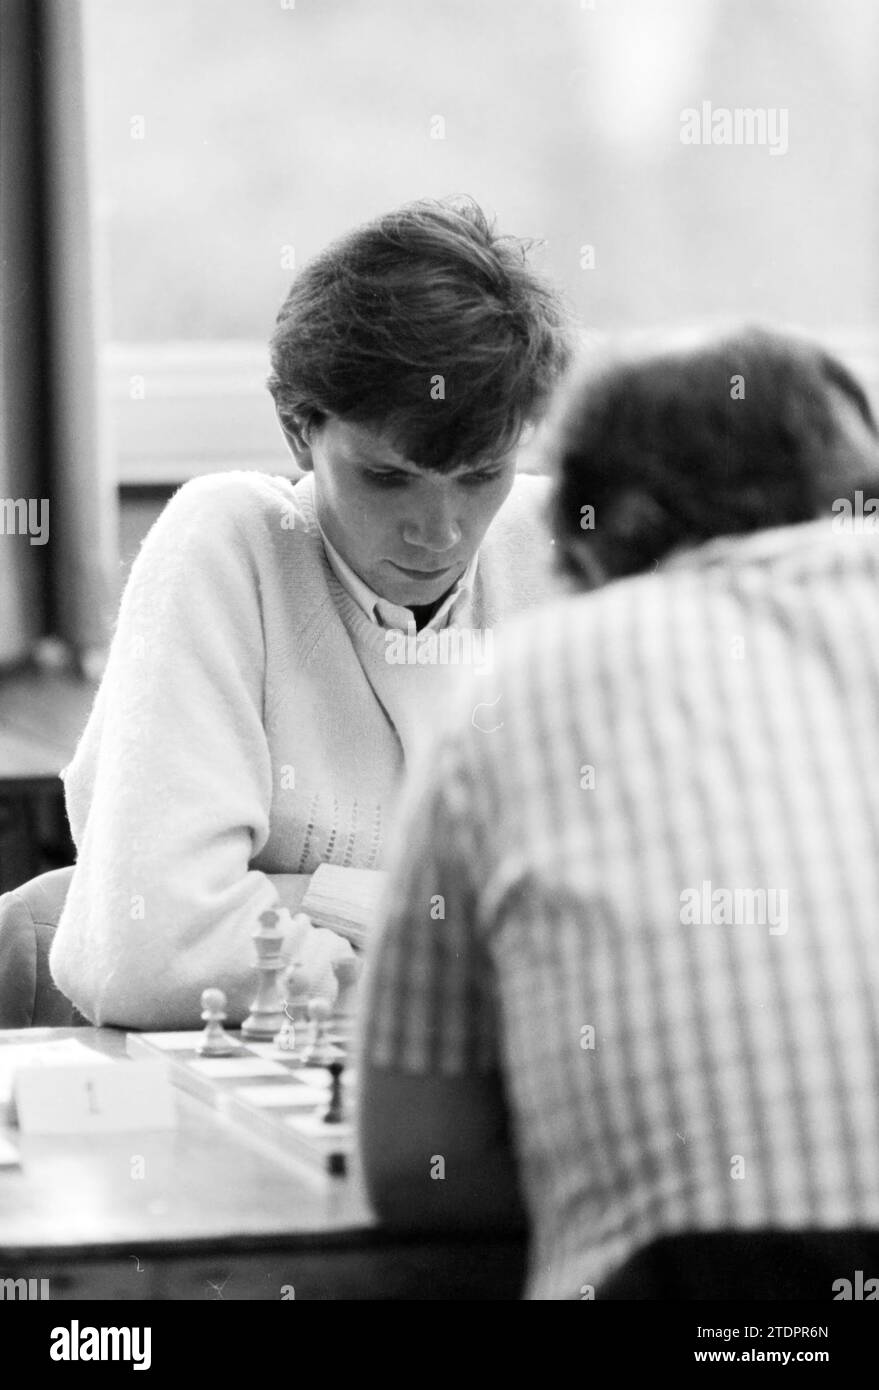 Alexander Kalinin, chess player, 30-08-1993, Whizgle News from the Past, Tailored for the Future. Explore historical narratives, Dutch The Netherlands agency image with a modern perspective, bridging the gap between yesterday's events and tomorrow's insights. A timeless journey shaping the stories that shape our future Stock Photo